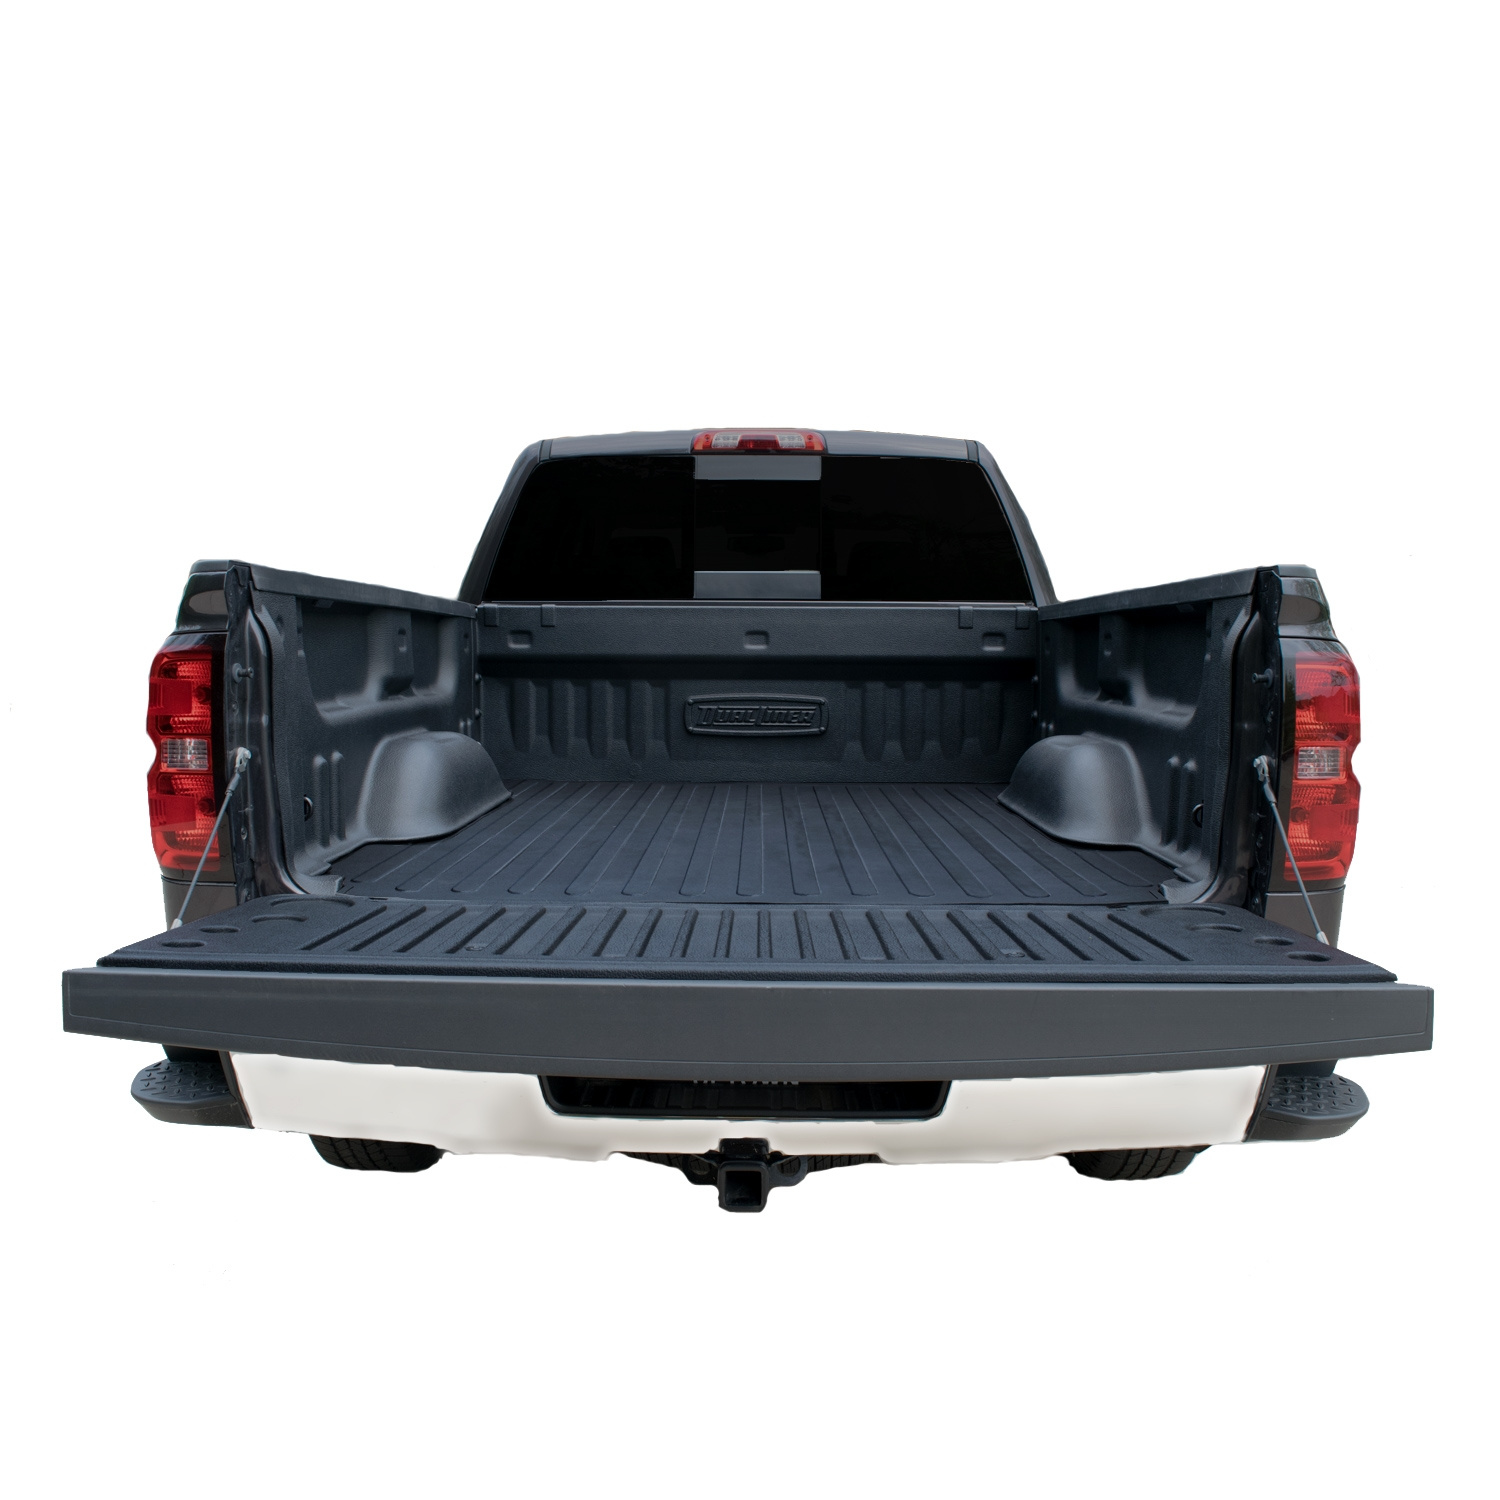 2014-2018 Chevy Silverado 1500 Truck Bed Liner for Crew Cab with 5 ft. 9 in. Truck Bed